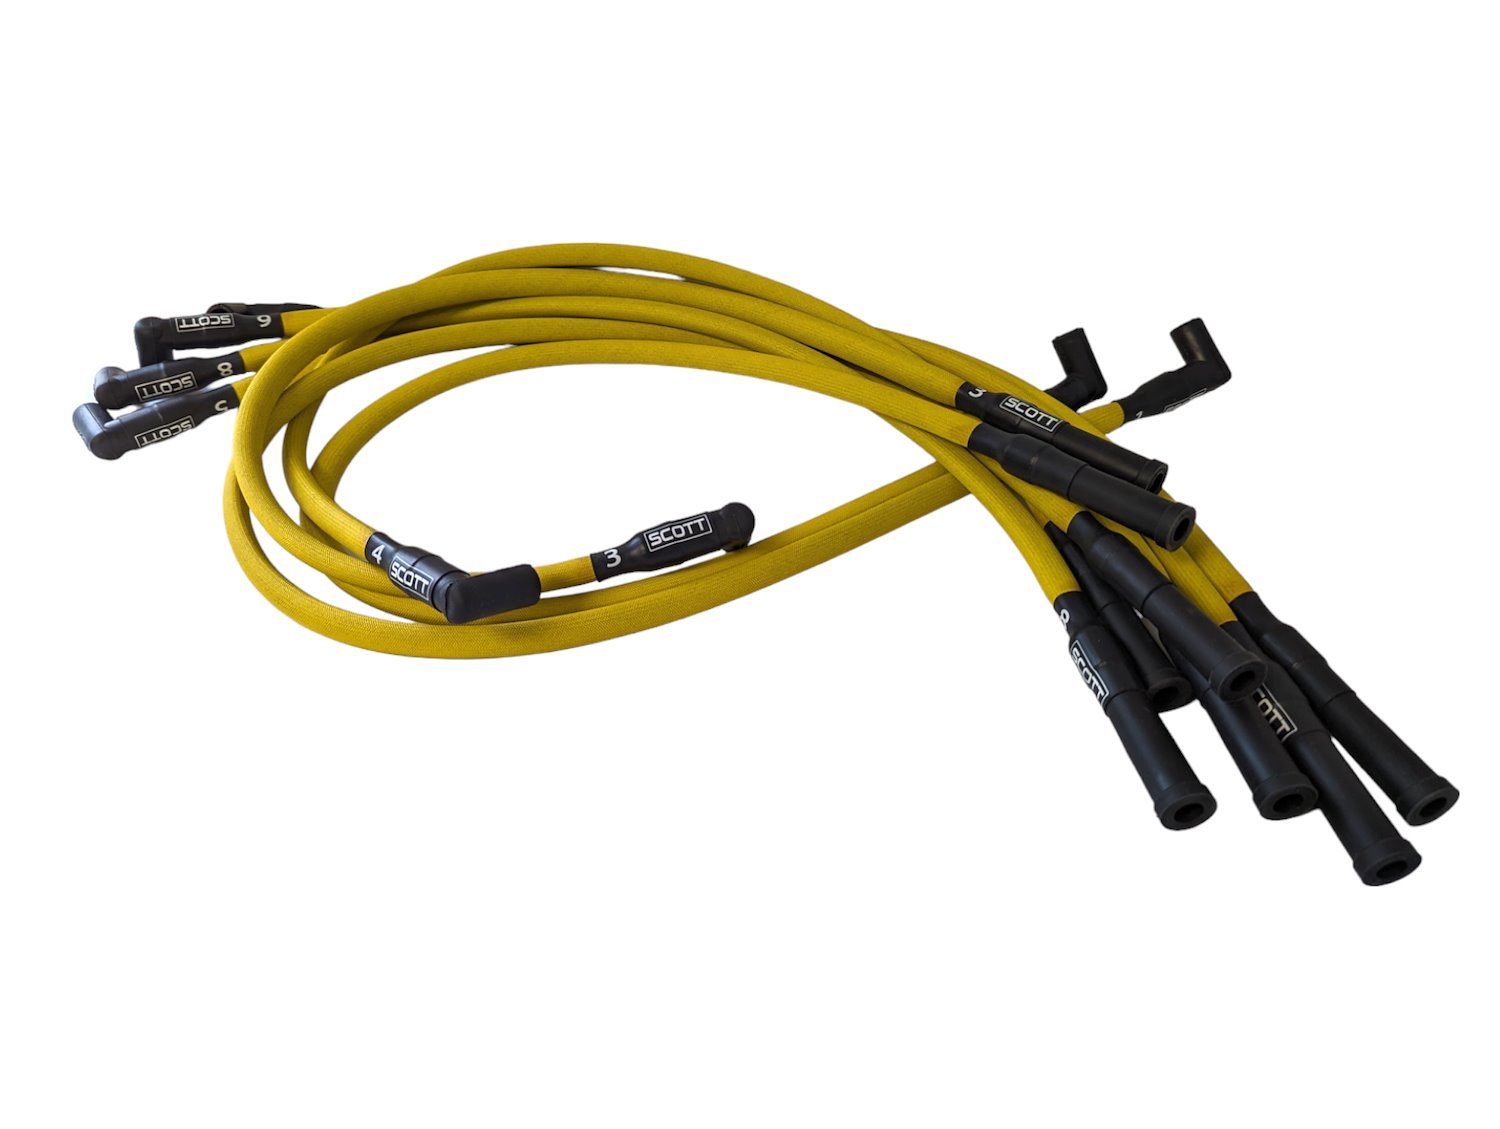 SPW-PS-428-5 High-Performance Fiberglass-Oversleeved Spark Plug Wire Set for Big Block Ford FE [Yellow]